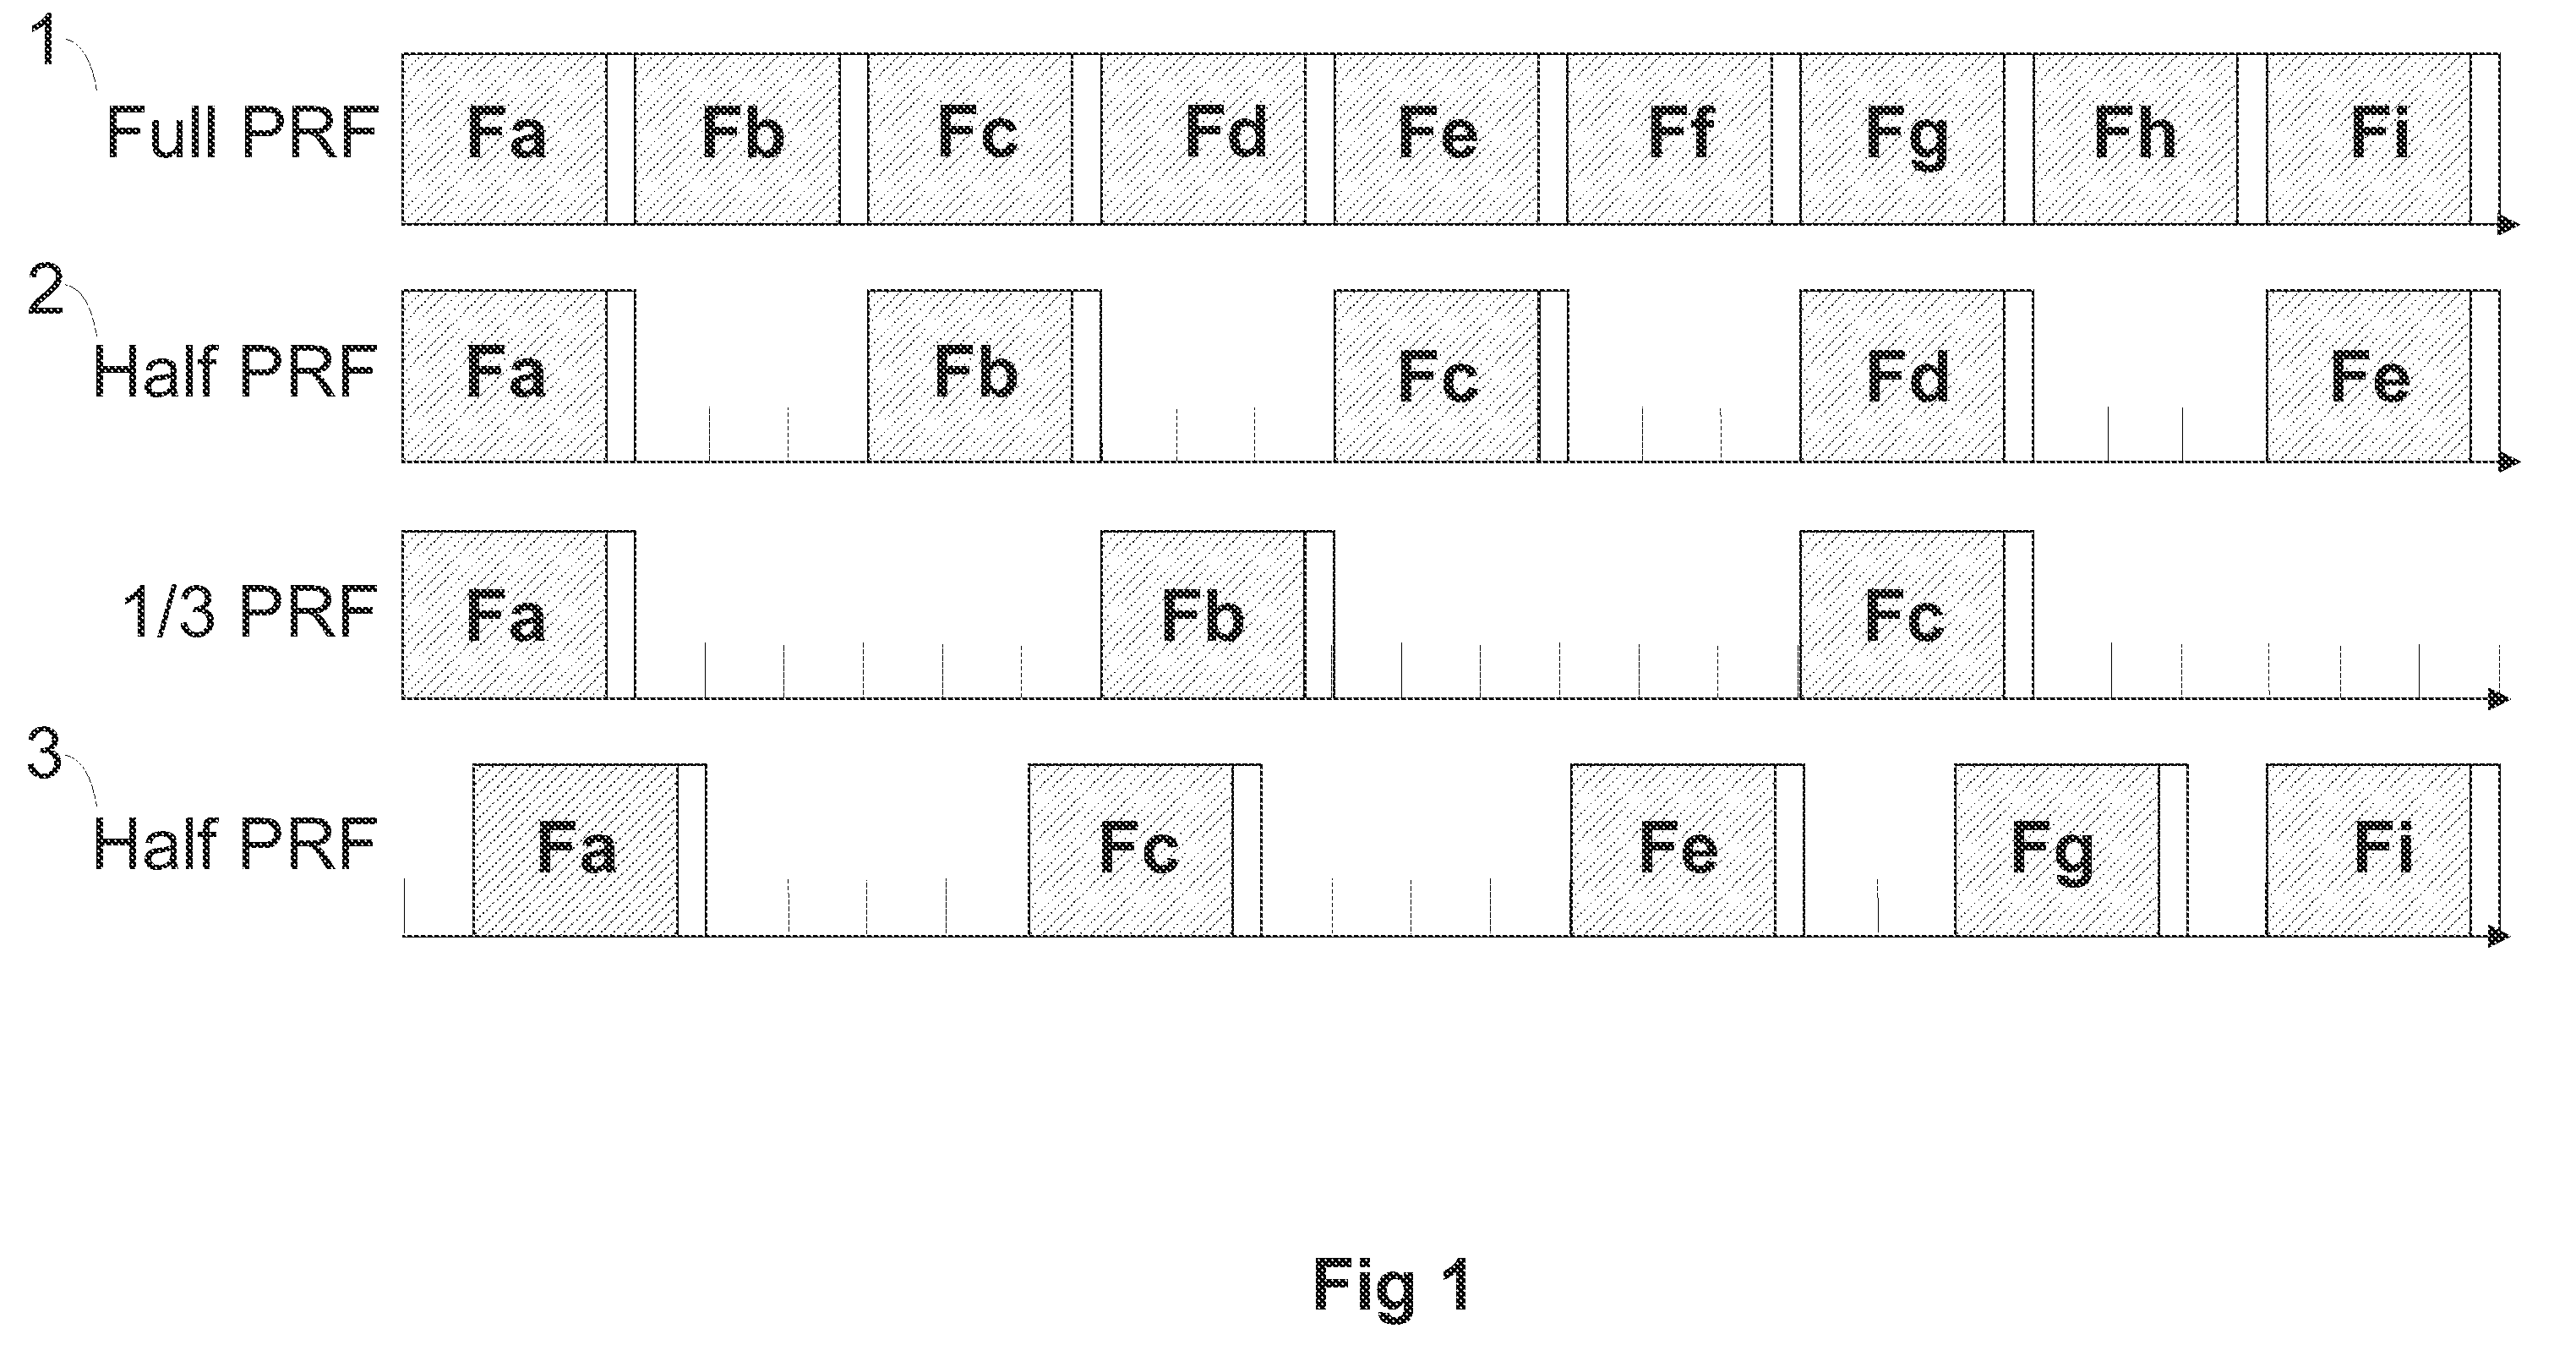 Scalable ultra-wide band communication system